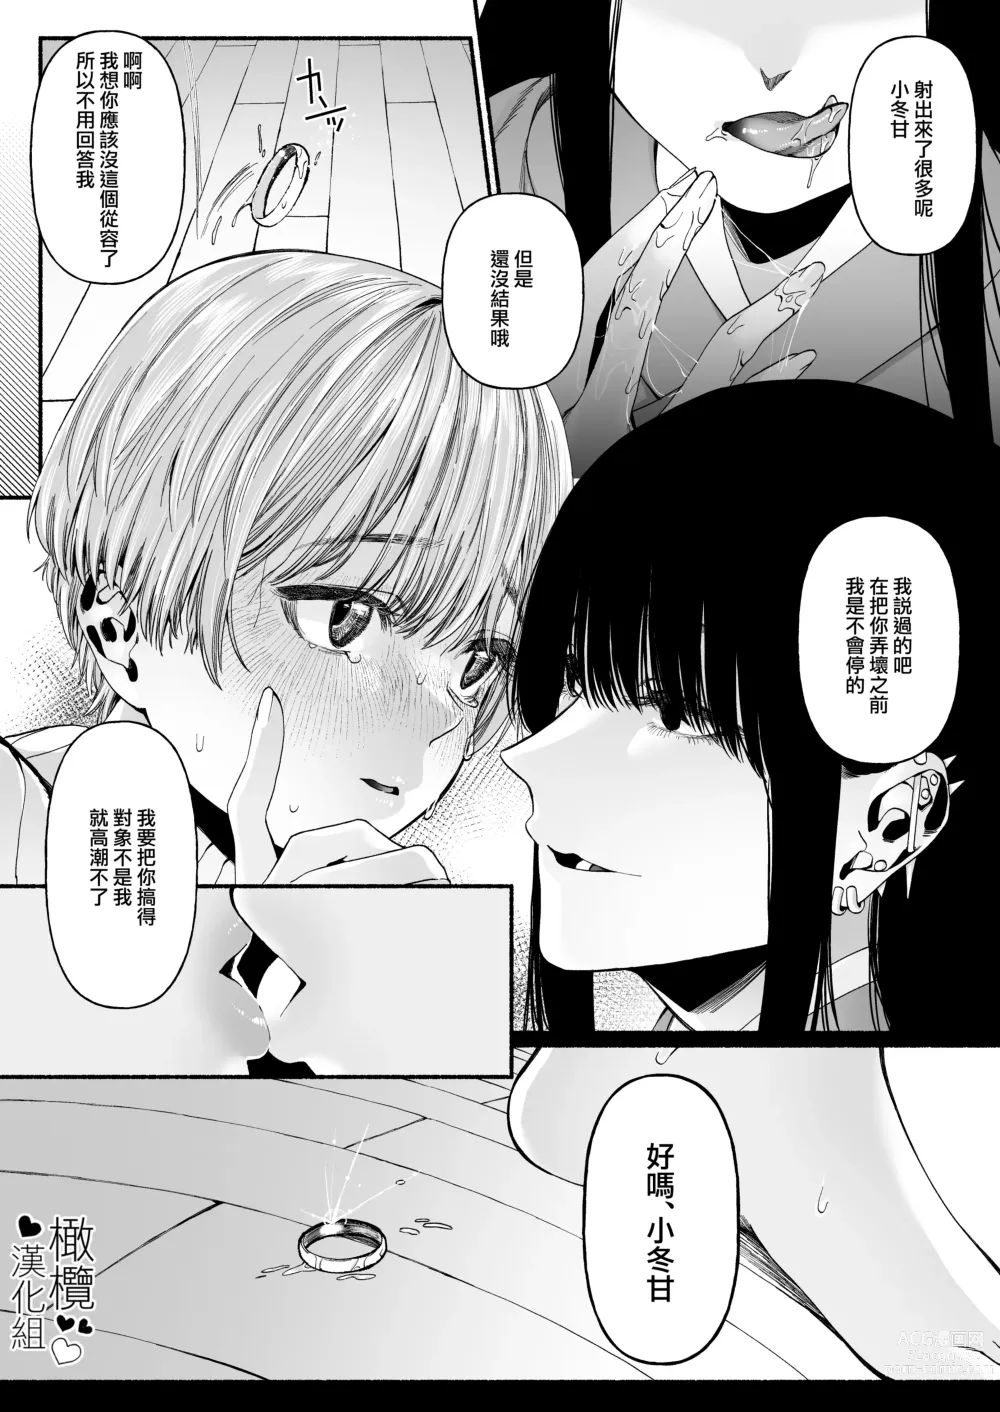 Page 24 of doujinshi 因報春鳥已死